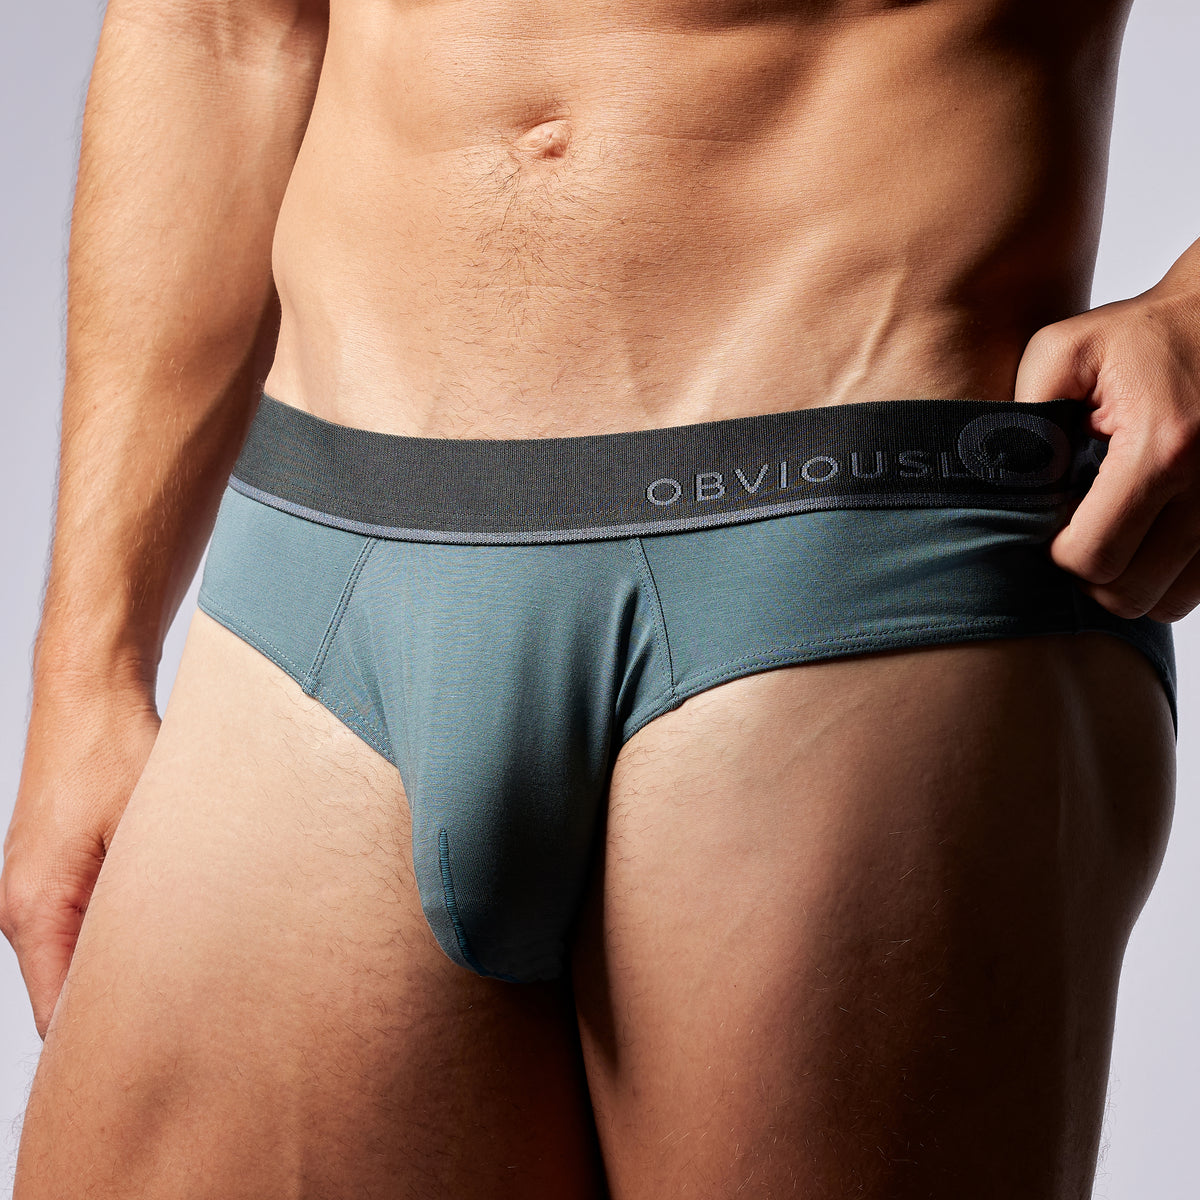 What Is The Most Comfortable Mens Underwear?